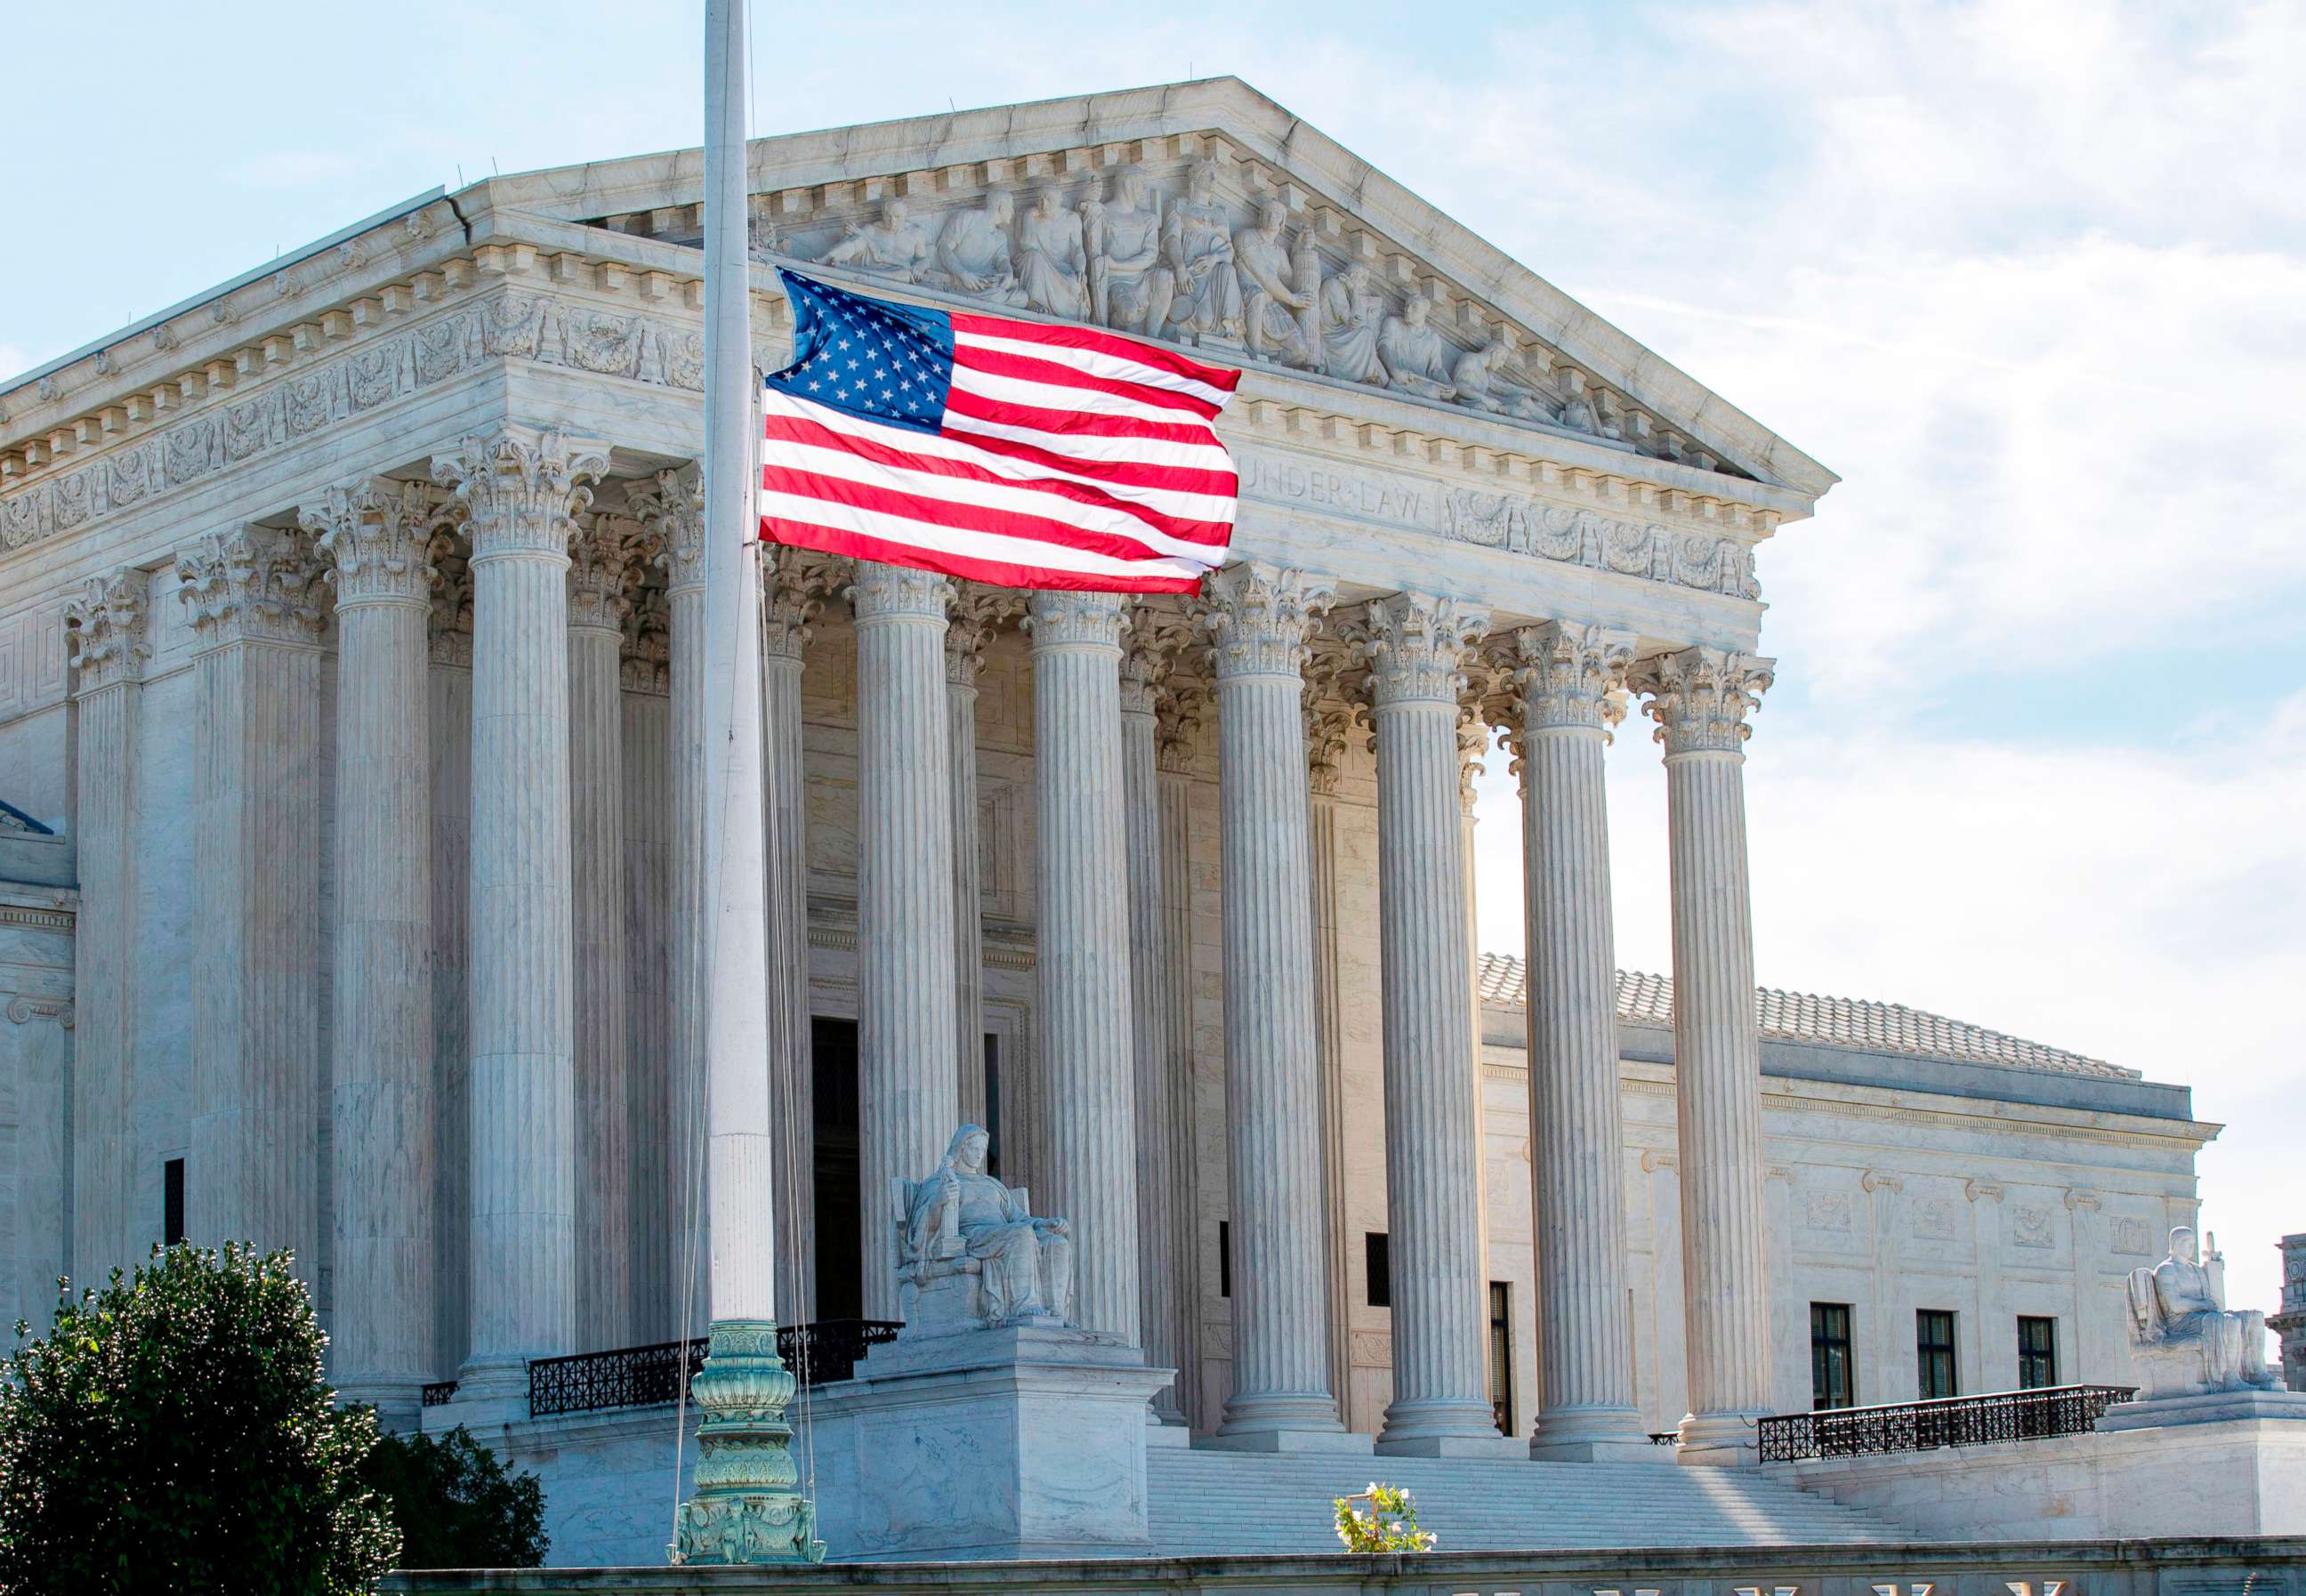 PHOTO: The US flag flies at half-staff outside of the Supreme Court in memory of Associate Justice Ruth Bader Ginsburg, in Washington on Sept. 19, 2020.